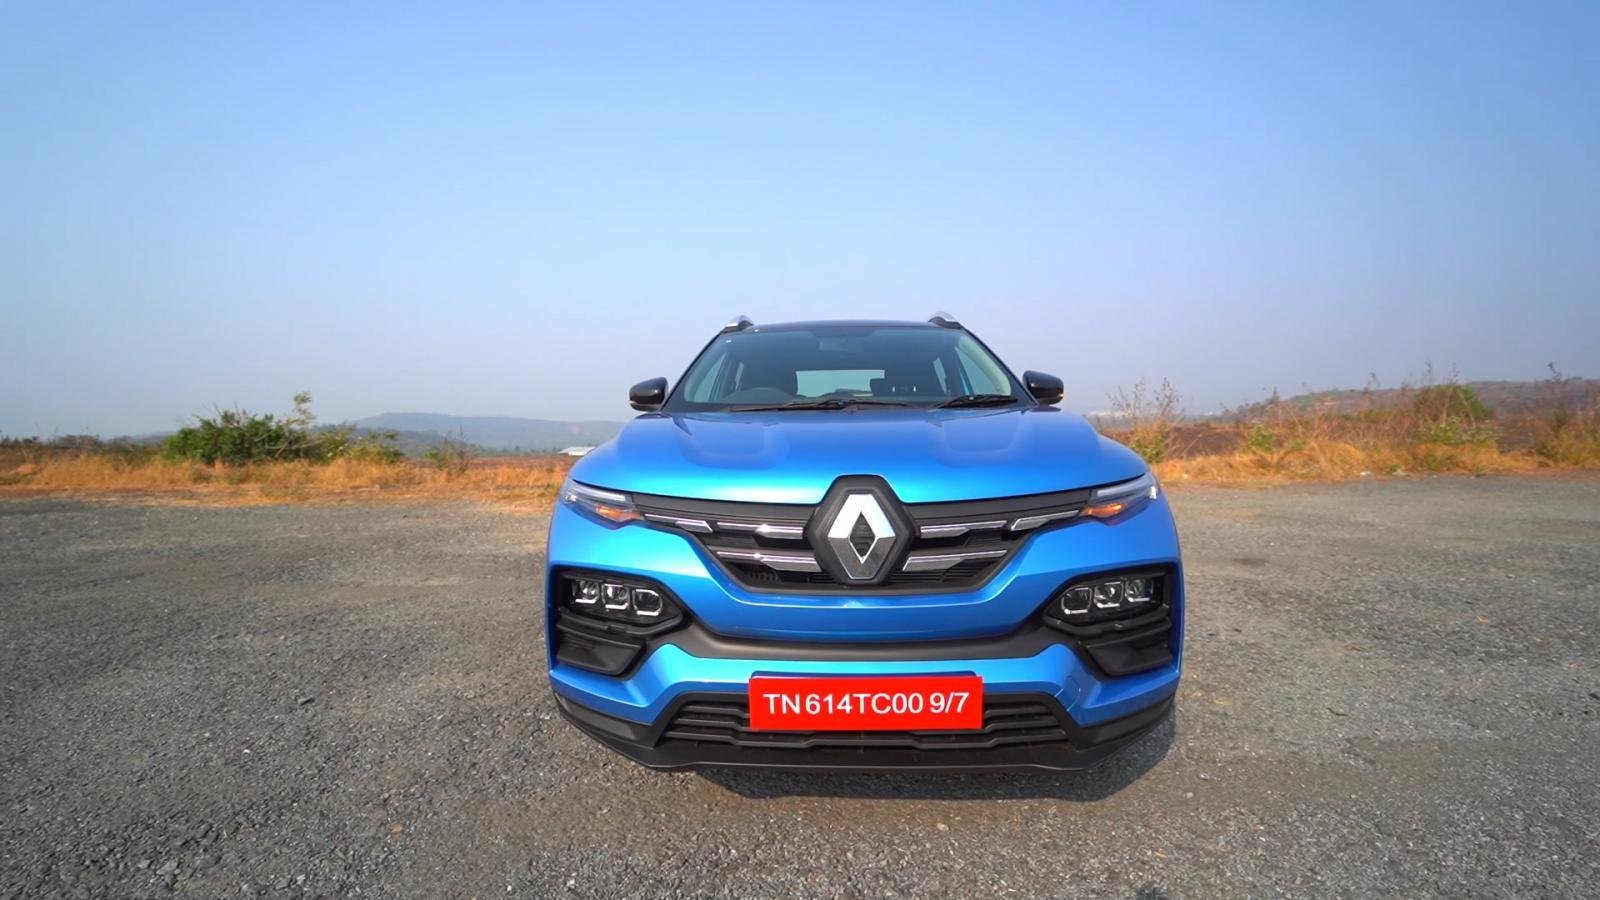 2021 Renault Kiger front view 2